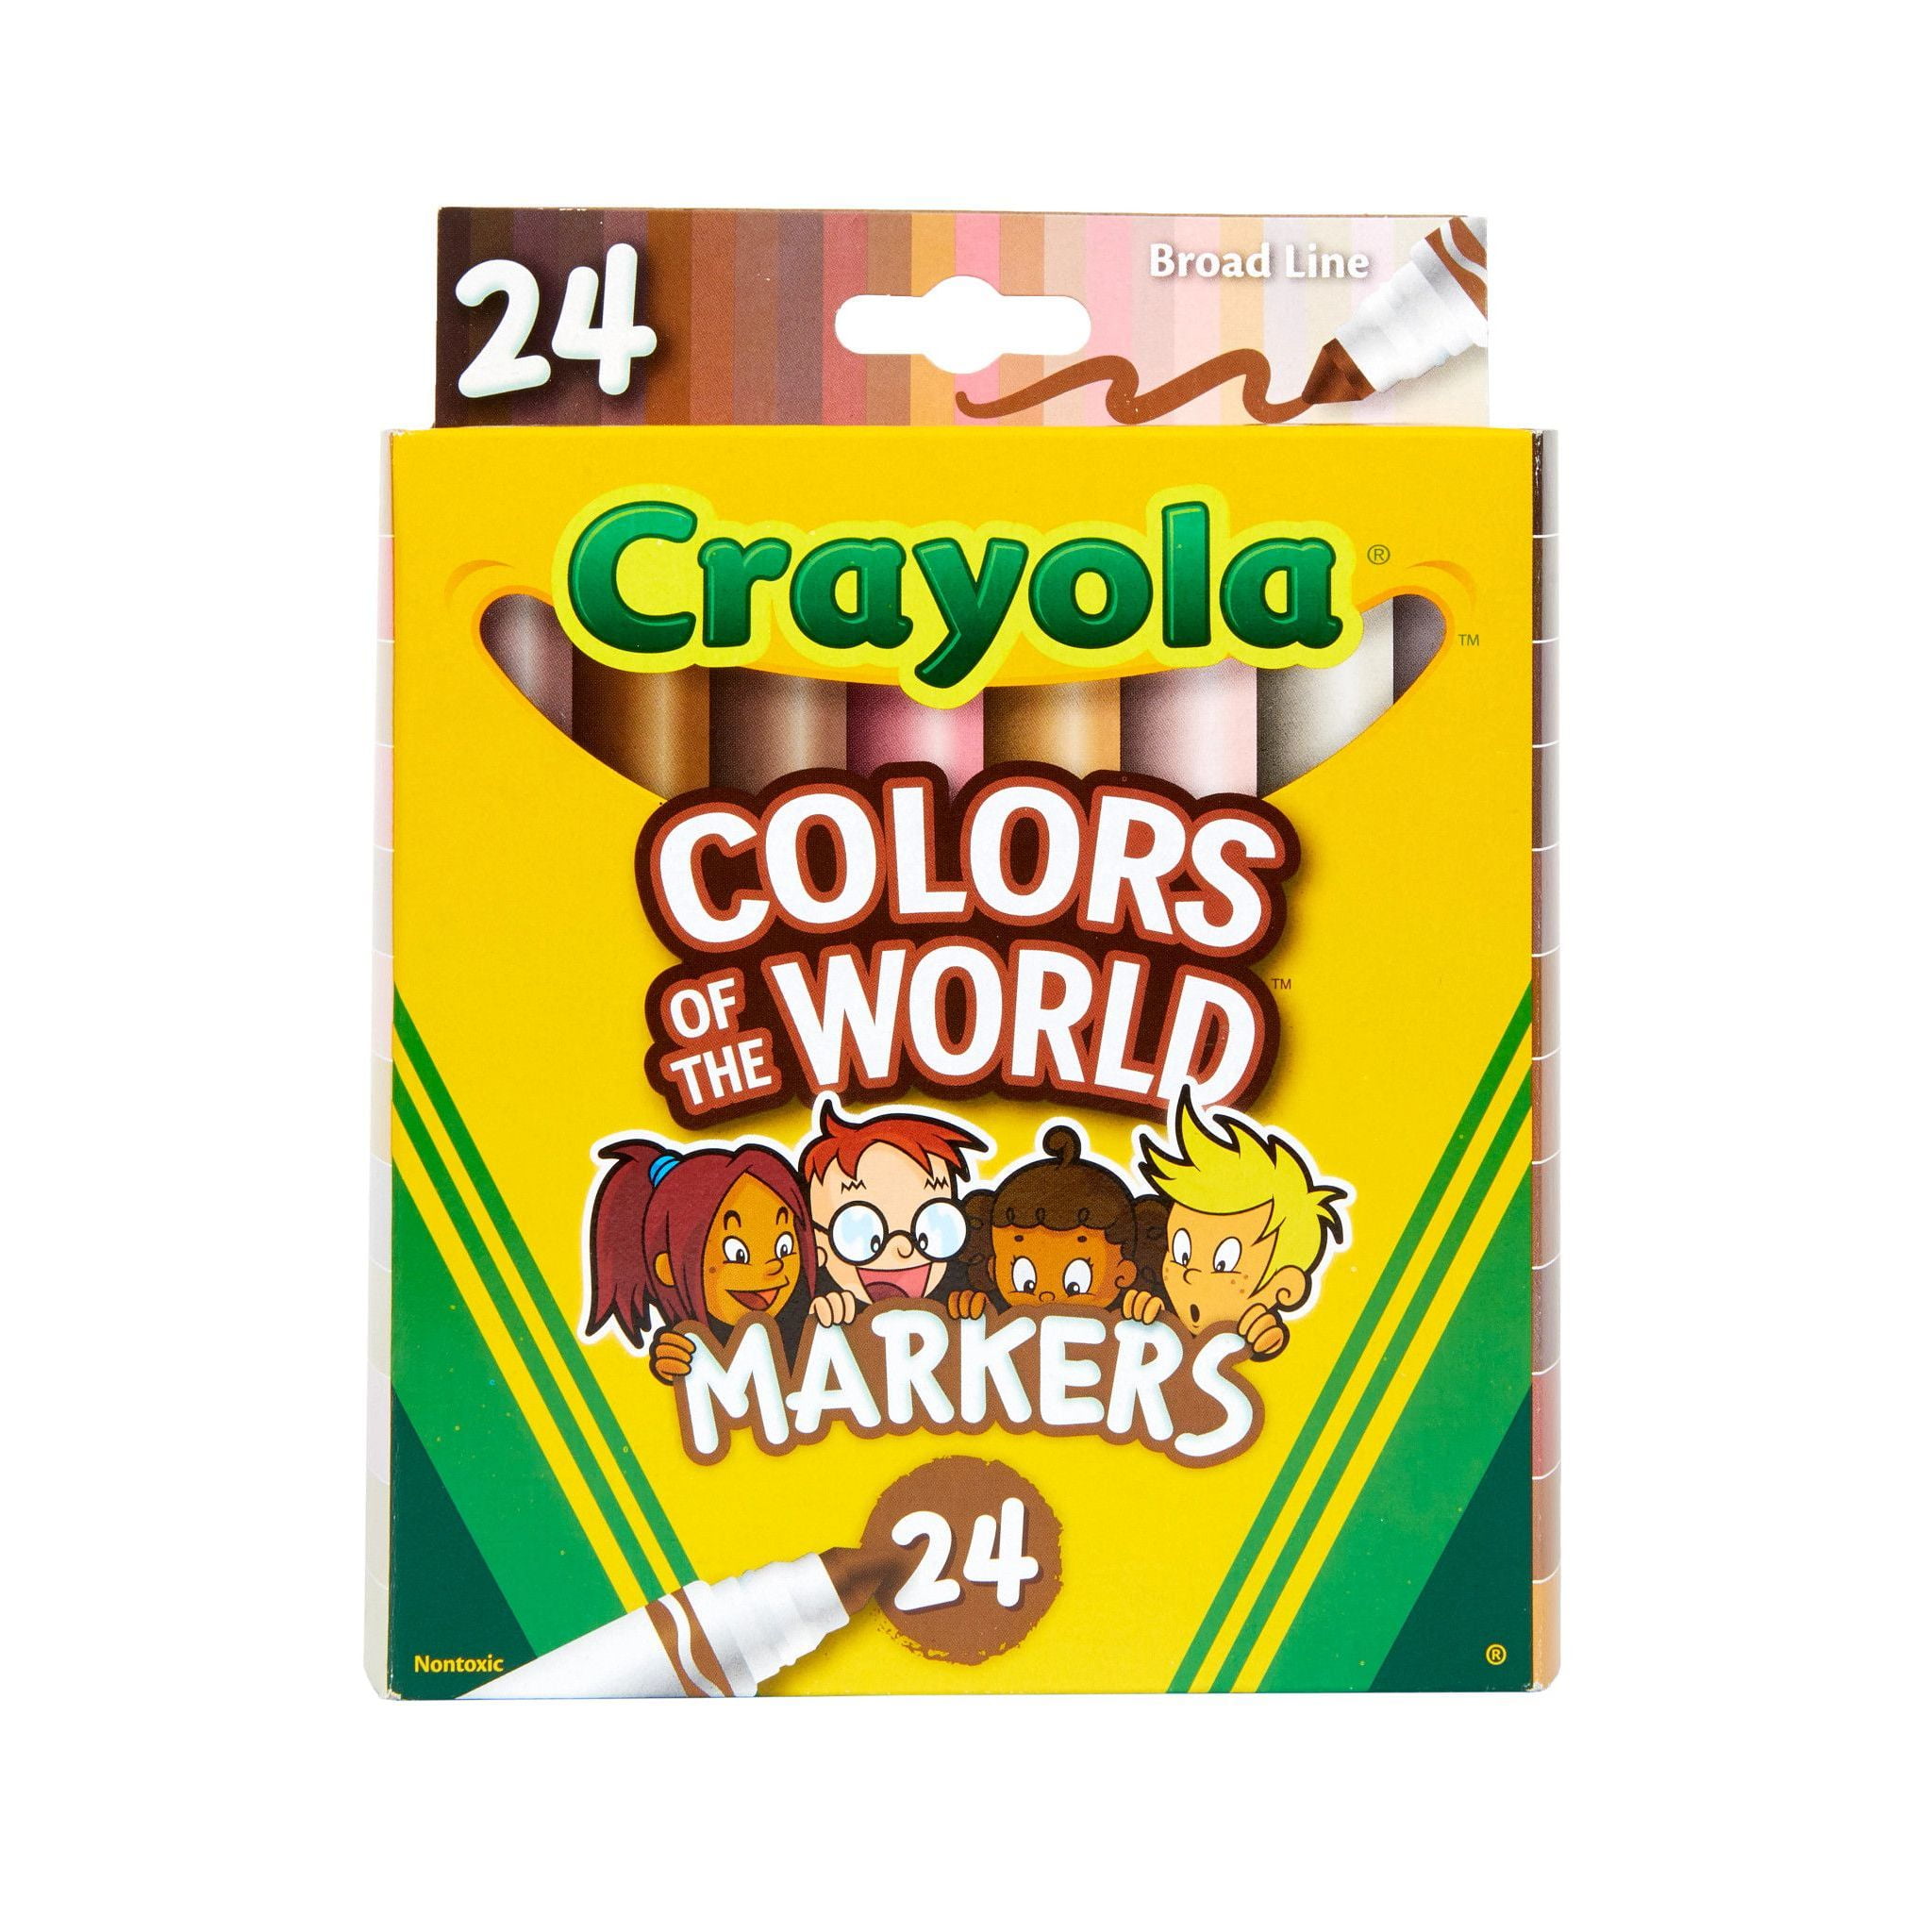 Crayola Colors of the World Art Markers, School Supplies, Beginner Child, 24 Count